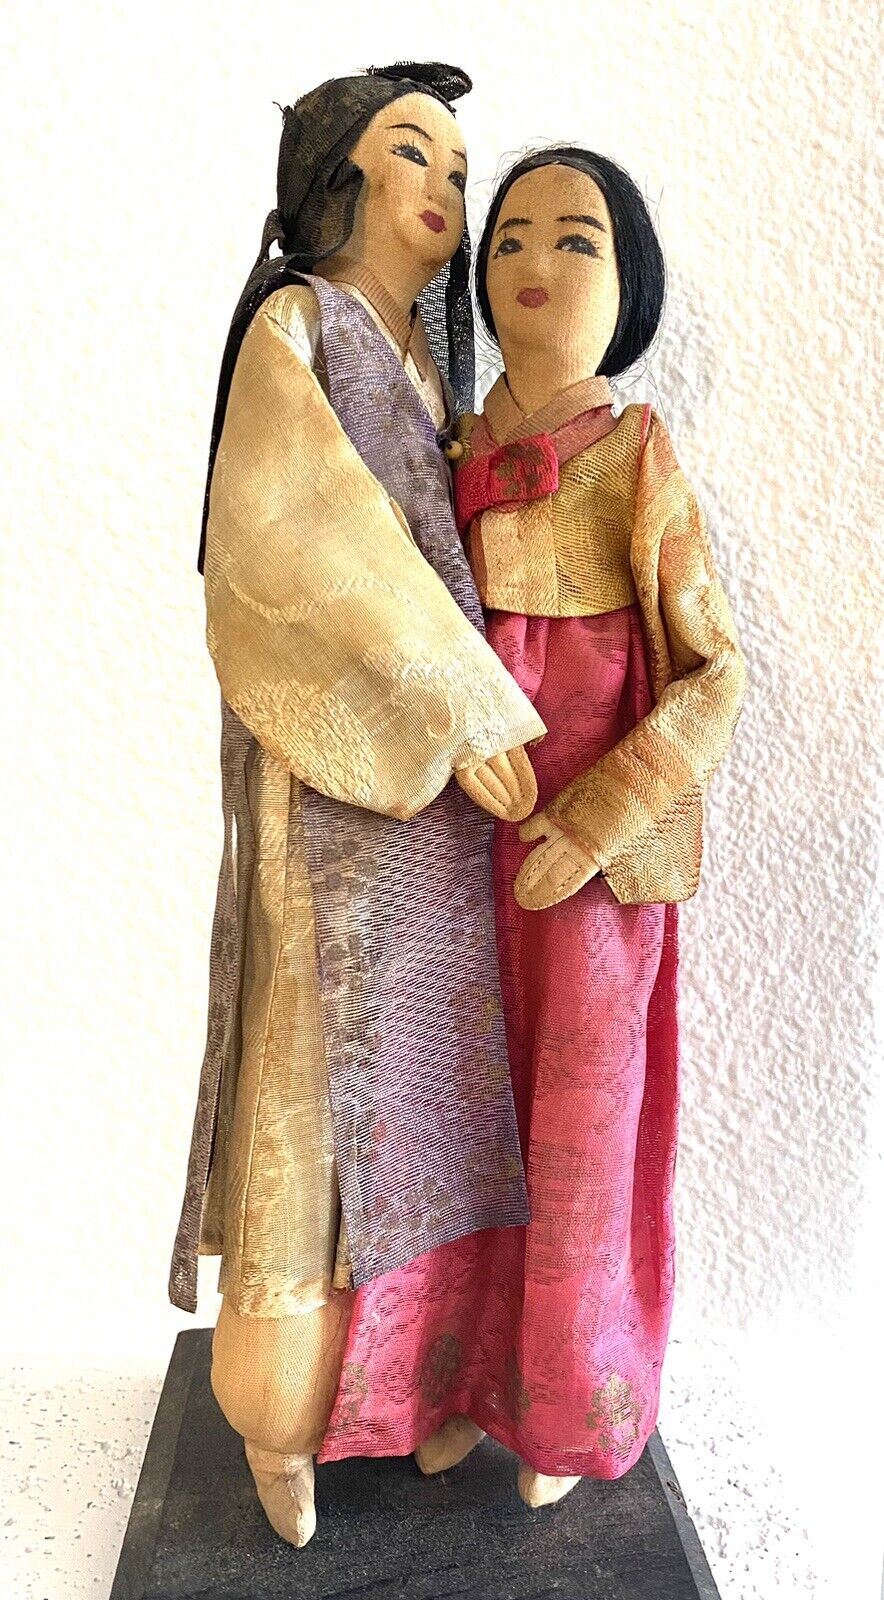 Antique 1940s Japanese, Asian, Handmade Dolls Mother, Daughter, 11.5” Rare Find